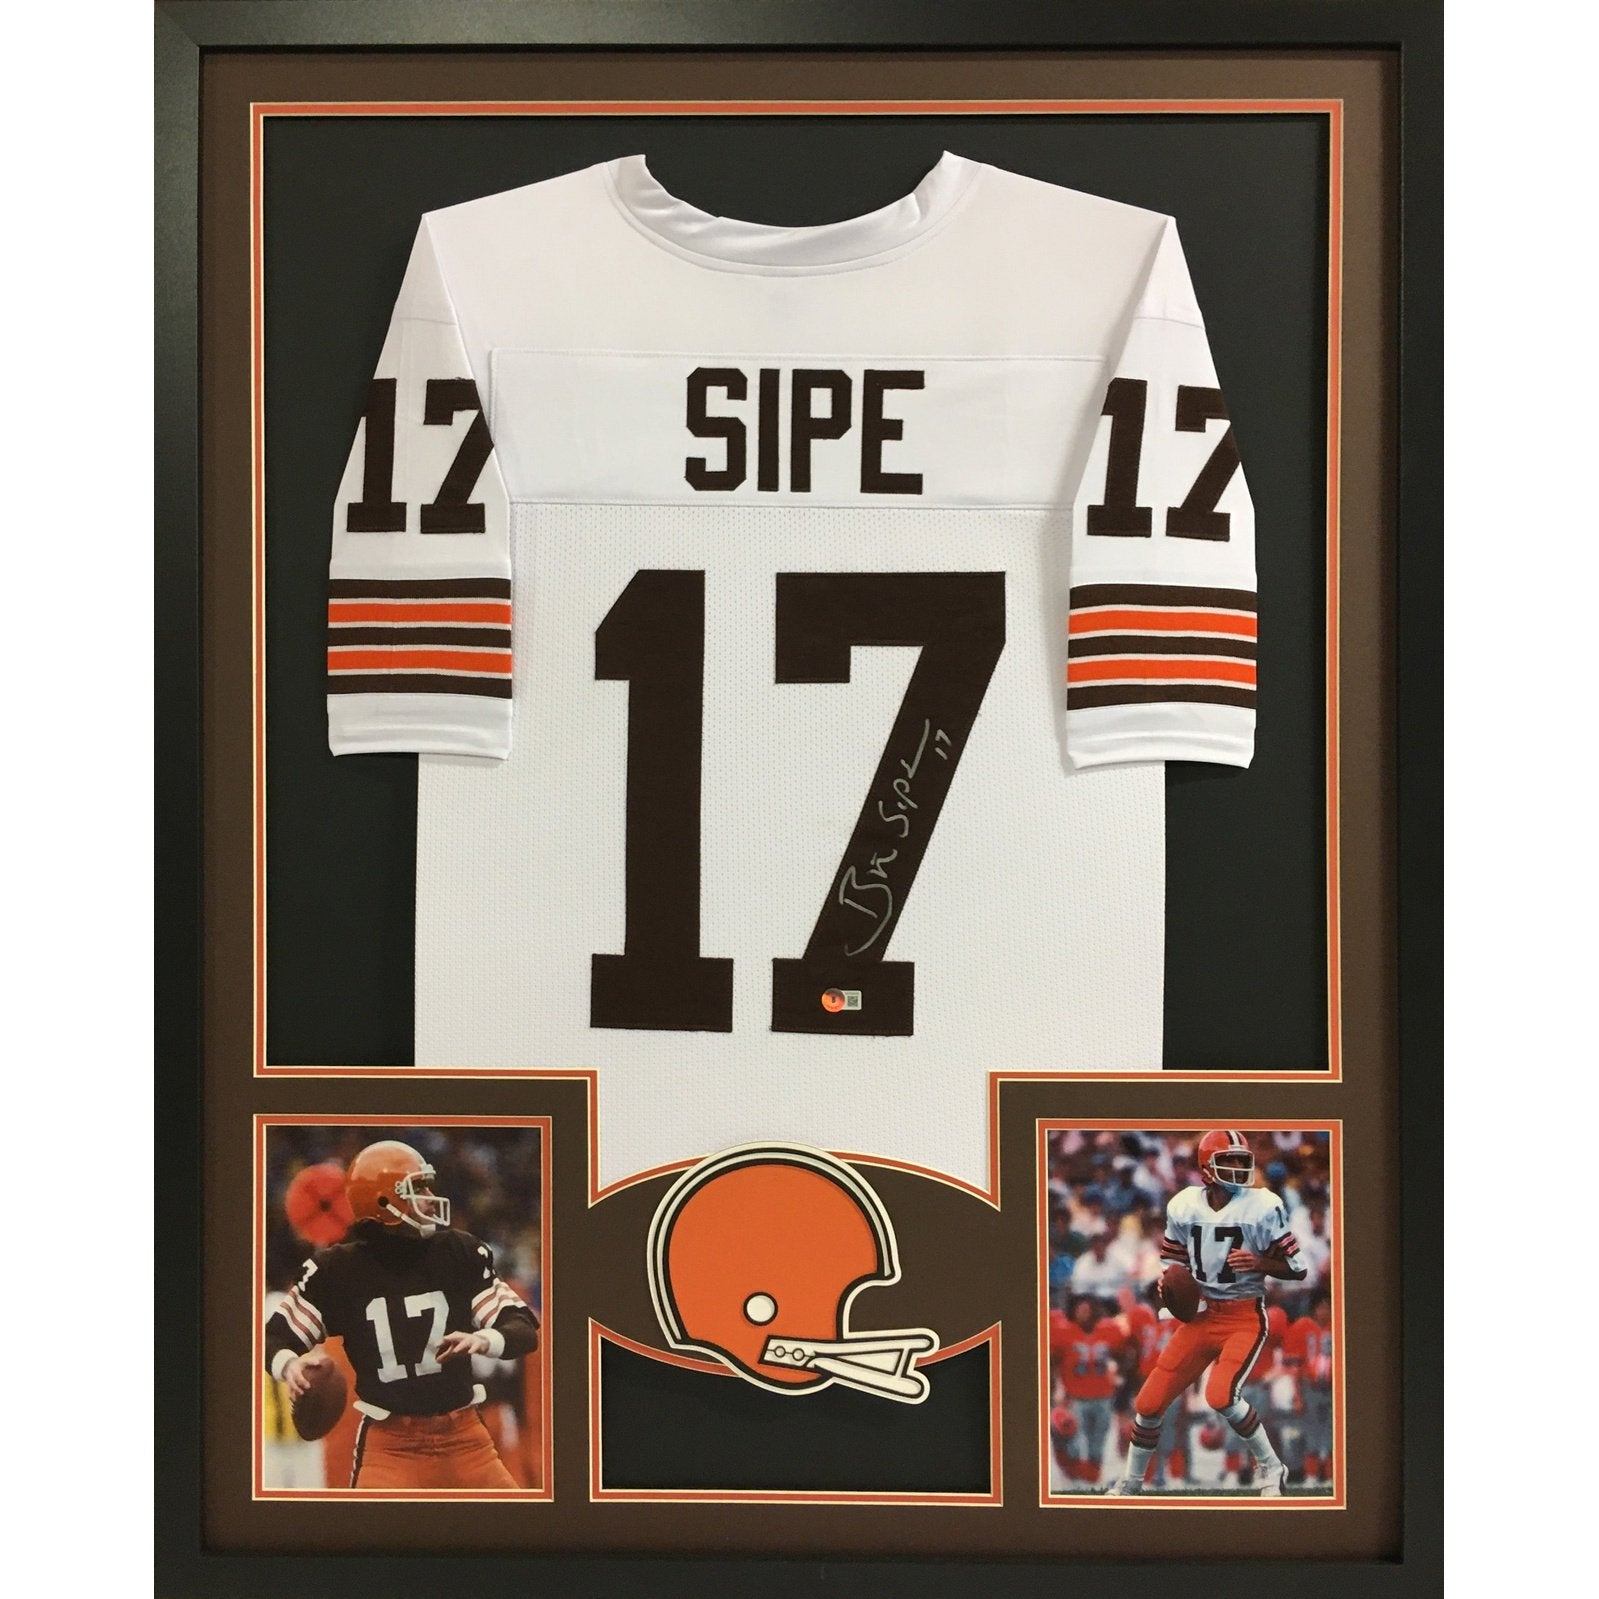 Brian Sipe Framed Signed Jersey Beckett Autographed Cleveland Browns